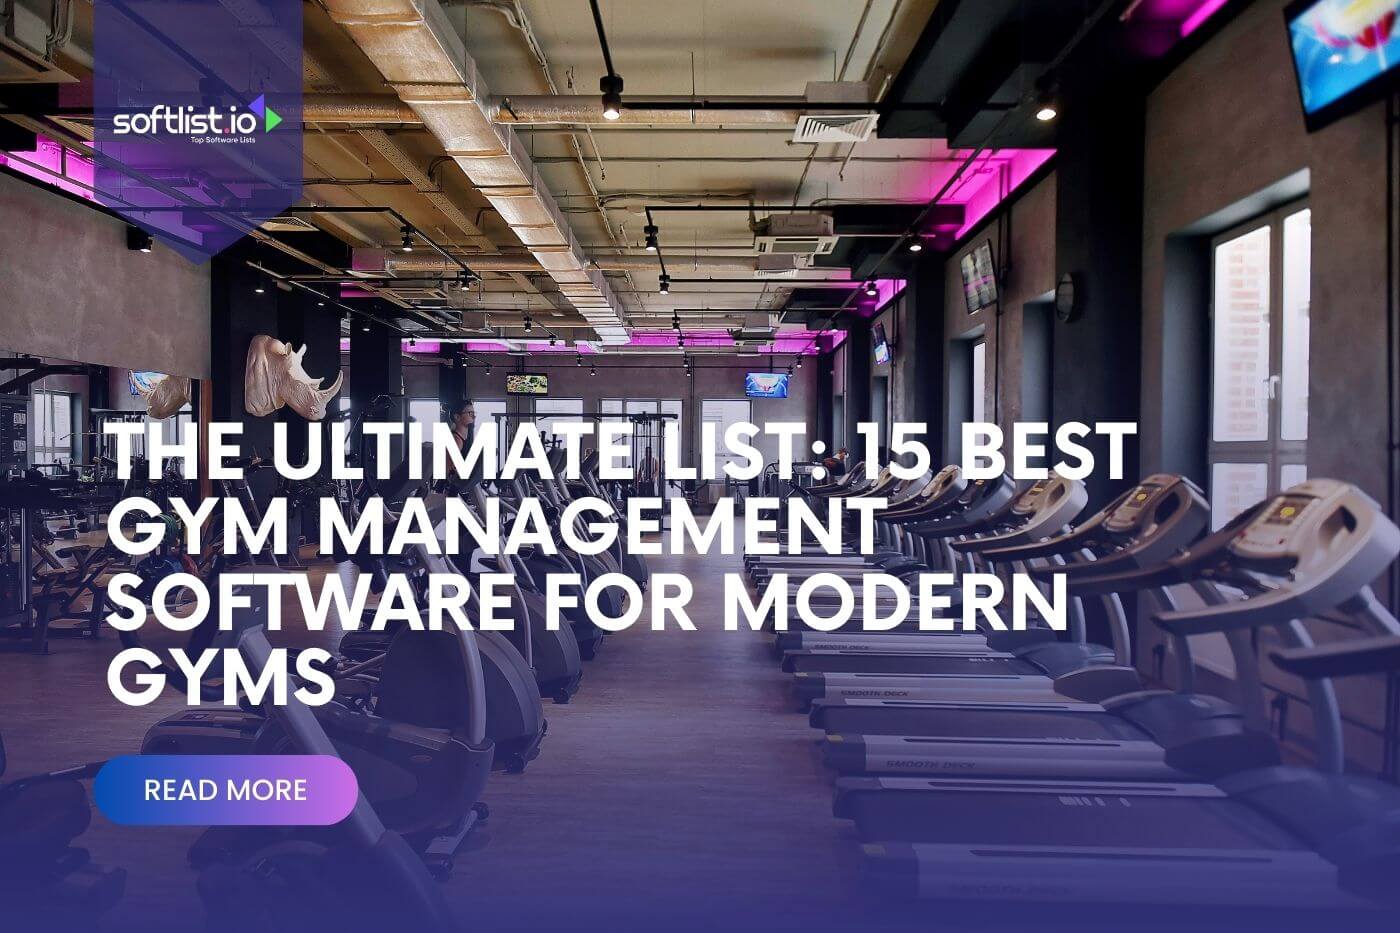 The Ultimate List 15 Best Gym Management Software for Modern Gyms